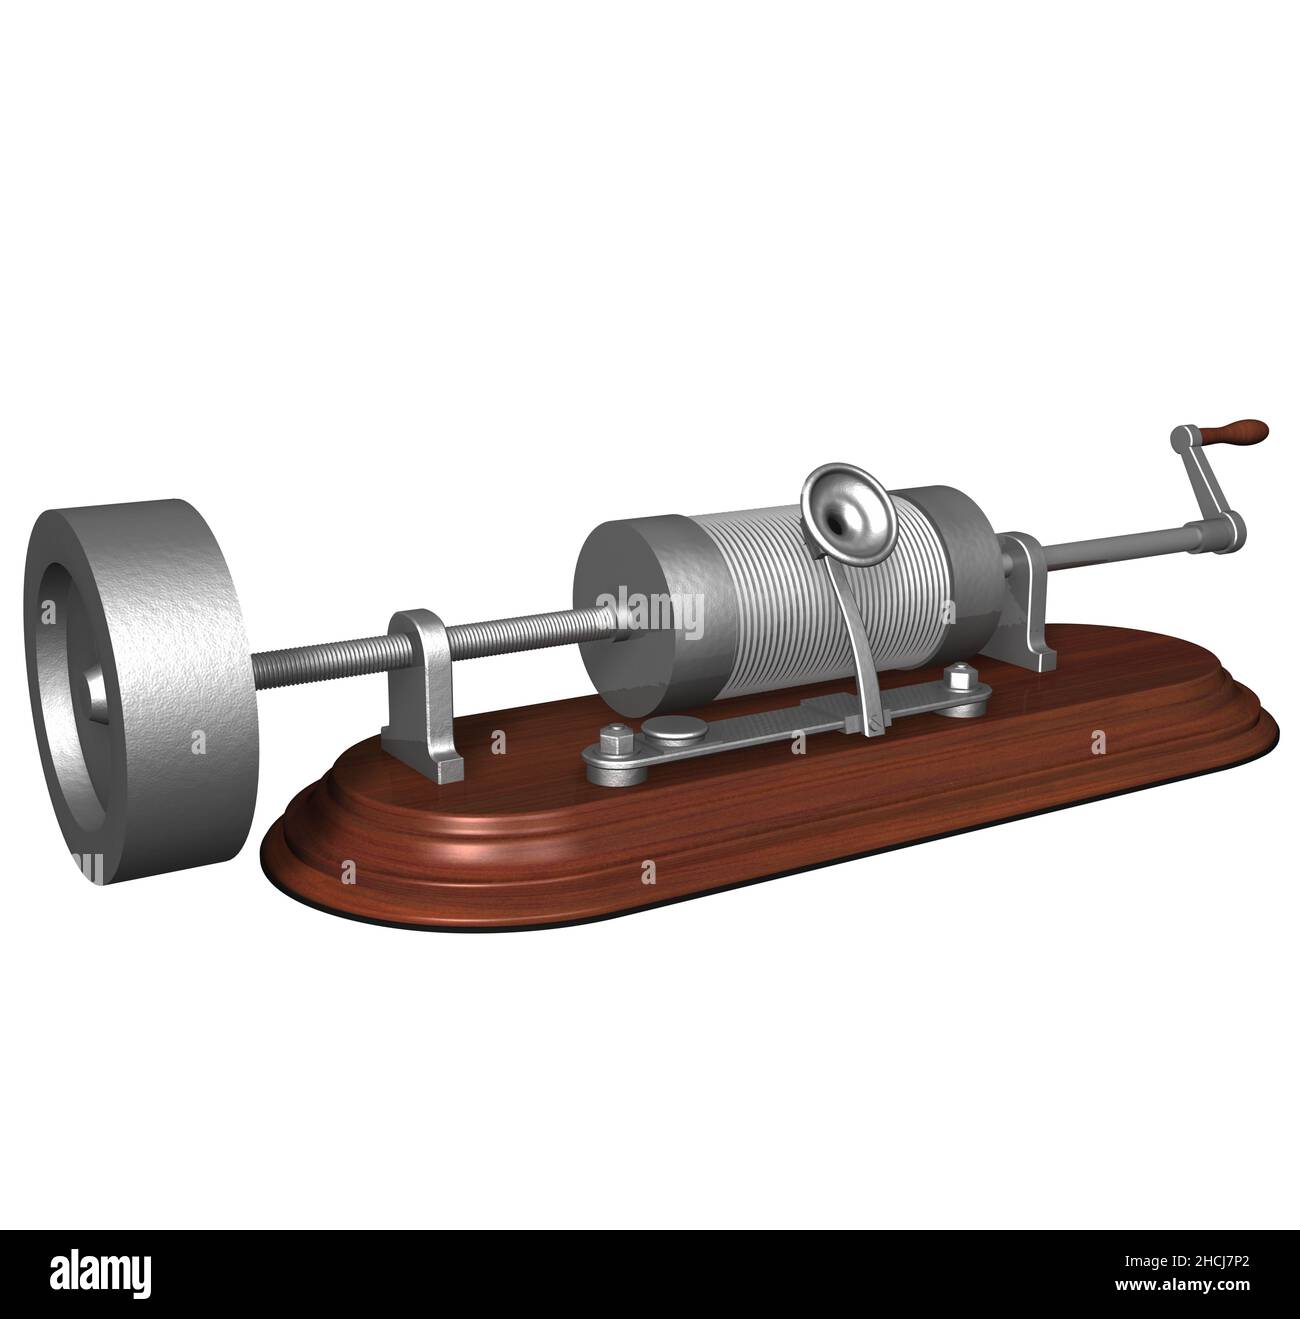 3D Rendering Illustration of Second Model of a Phonograph invented, created and patented by Thomas Alva Edison in 1878. Stock Photo